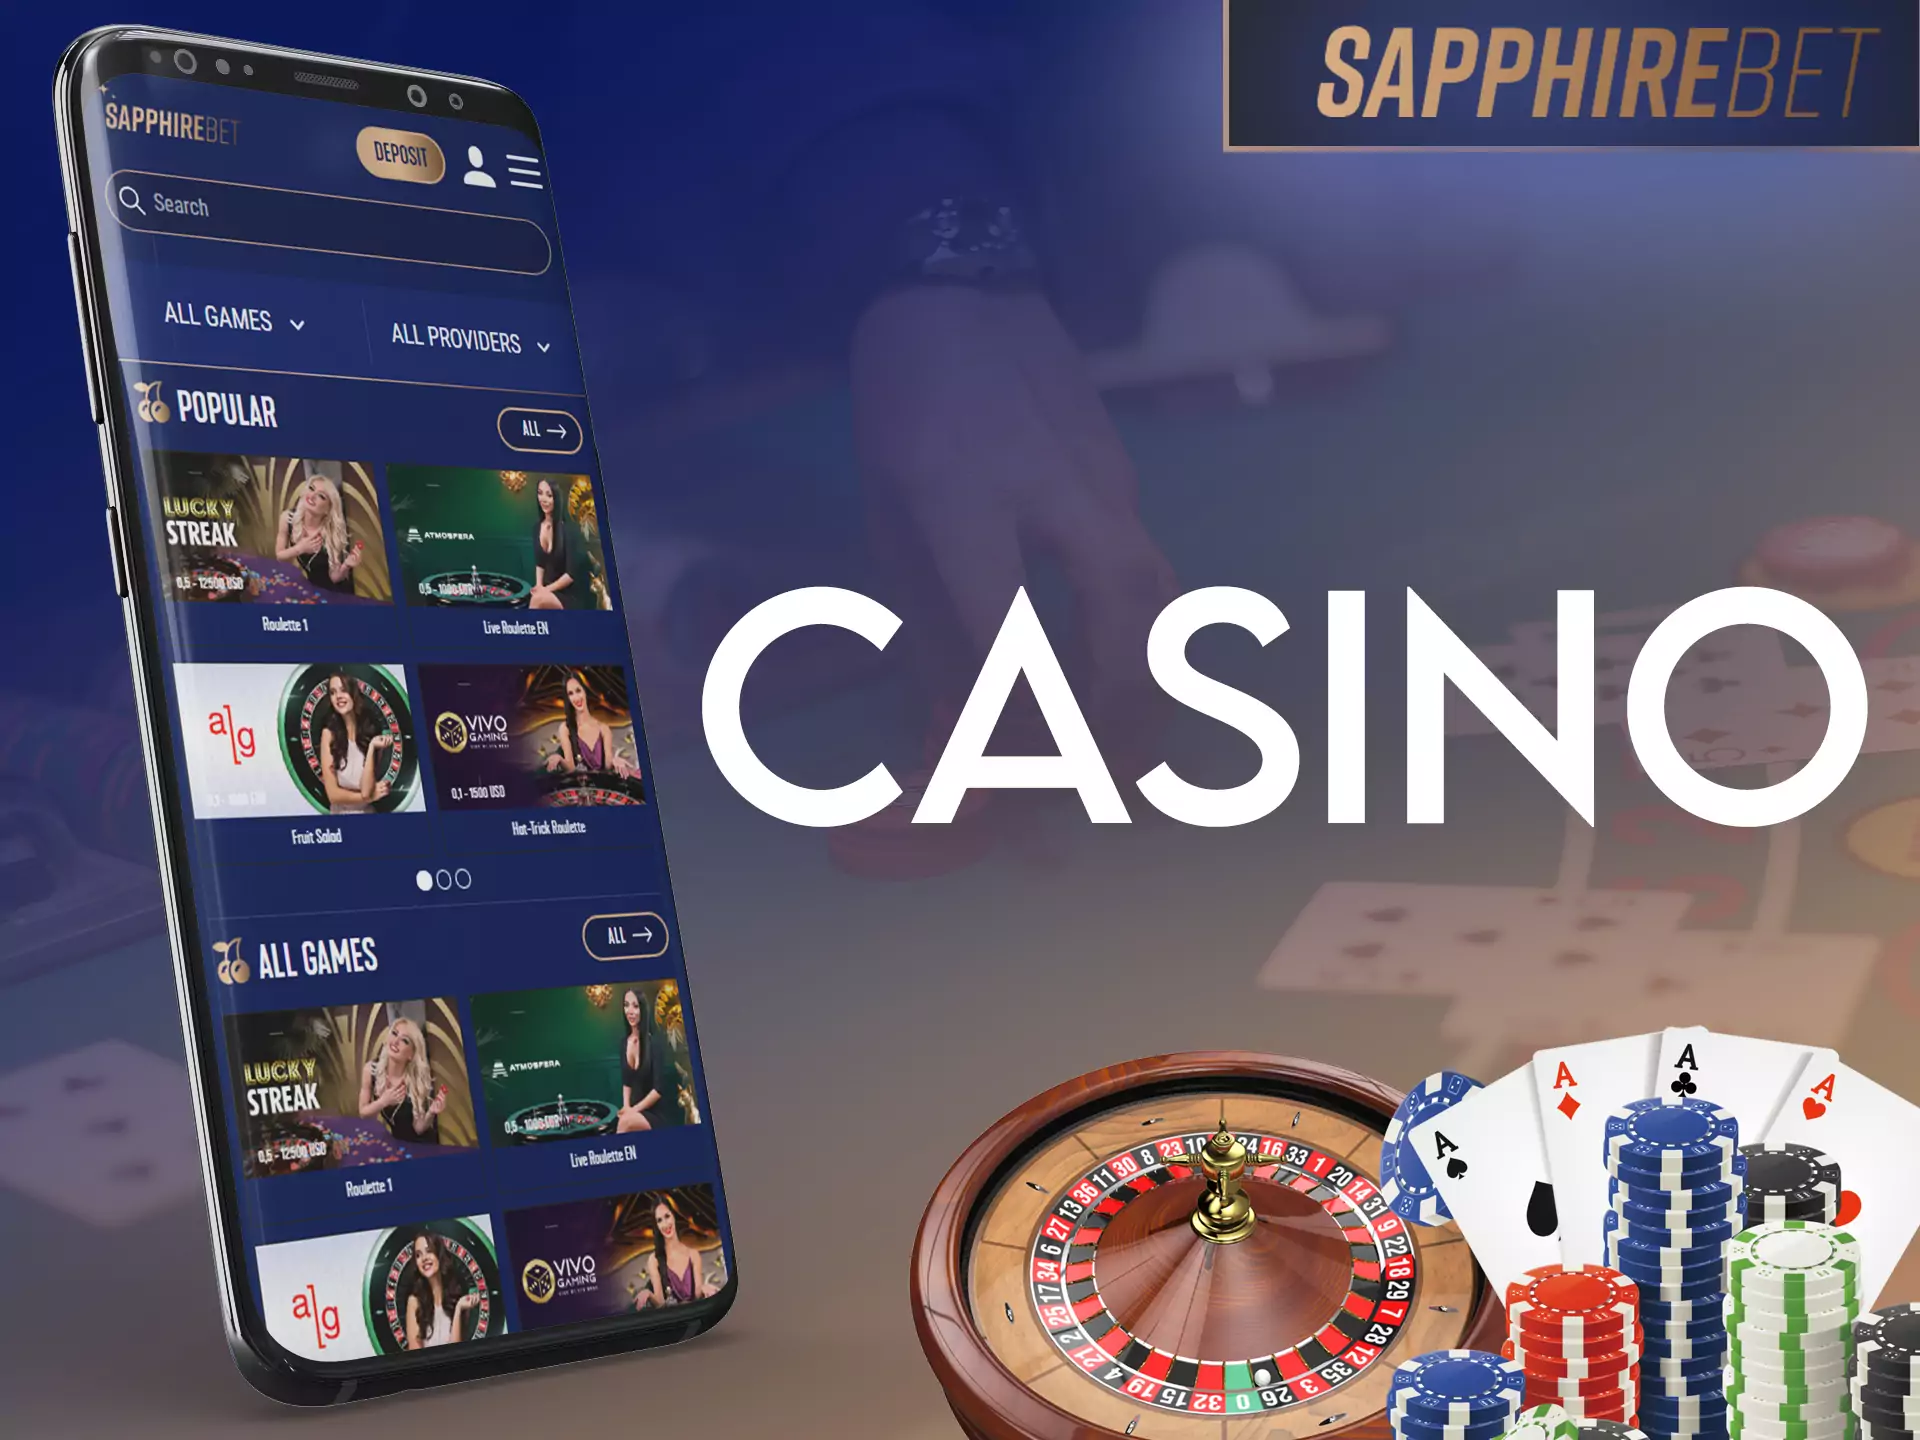 The Sapphirebet app has a great opportunity to play at the Casino.